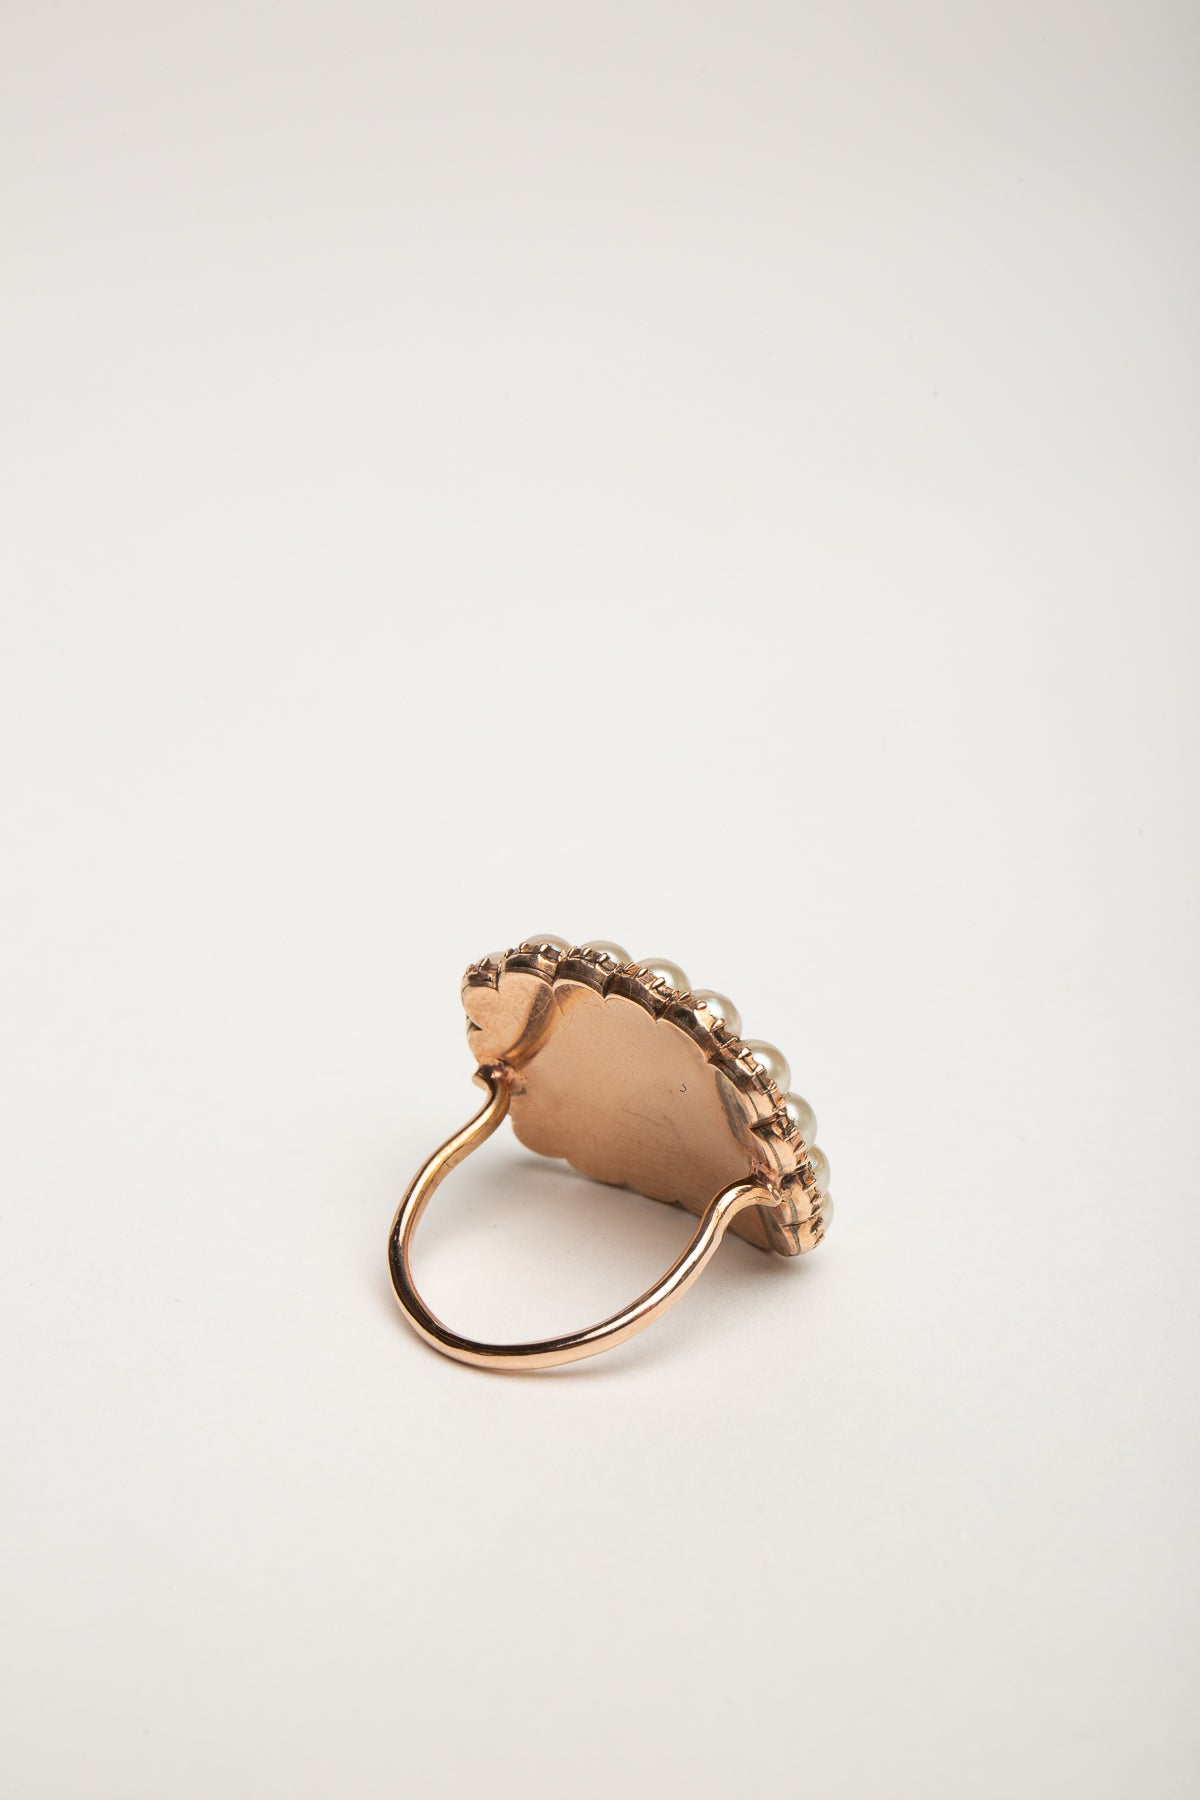 MAXFIELD PRIVATE COLLECTION | 1800'S PAINTED SQUARE EYE PEARL RING